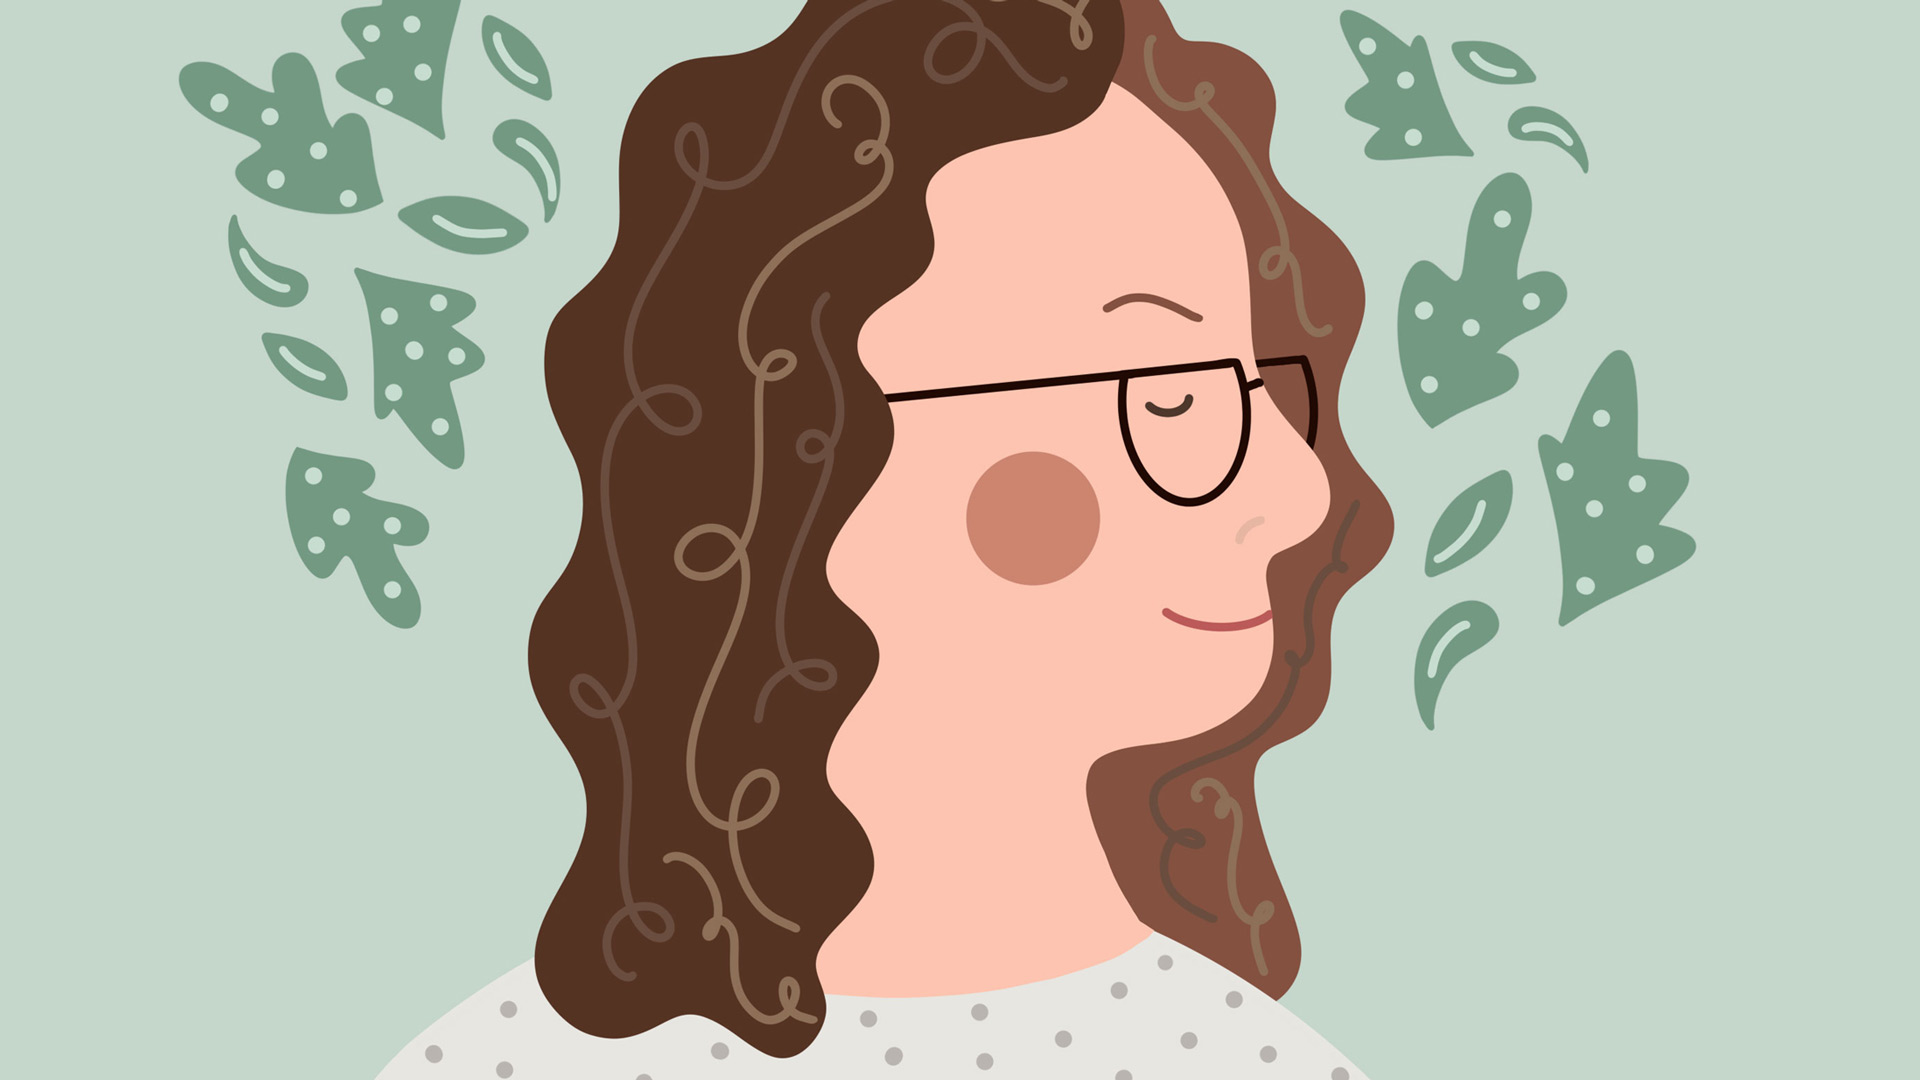 A side-profile portrait of the writer Emma Mitchell illustrated in a whimsical and playful illustration style.